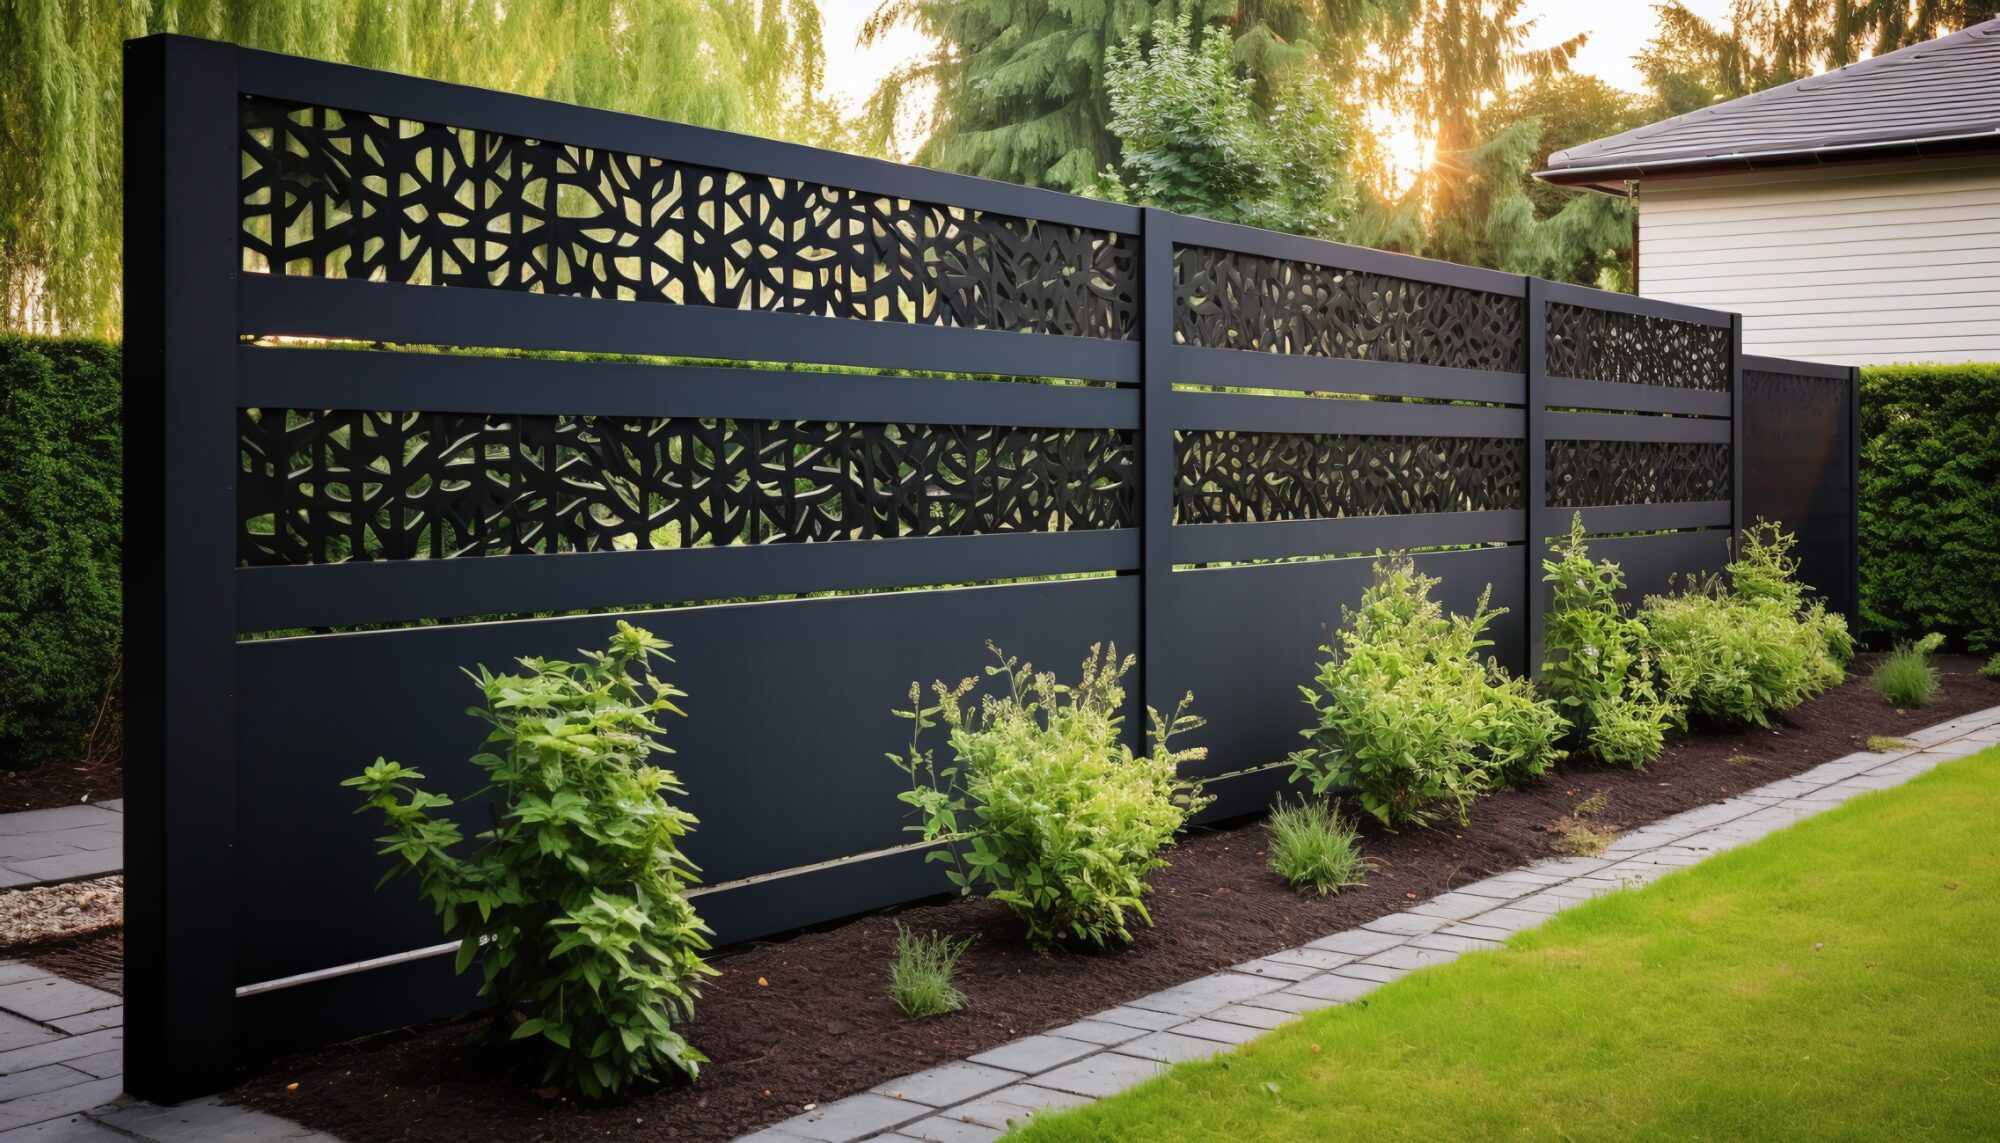 How Does Custom Fabrication Enhance the Aesthetics and Functionality of Screen Walls?